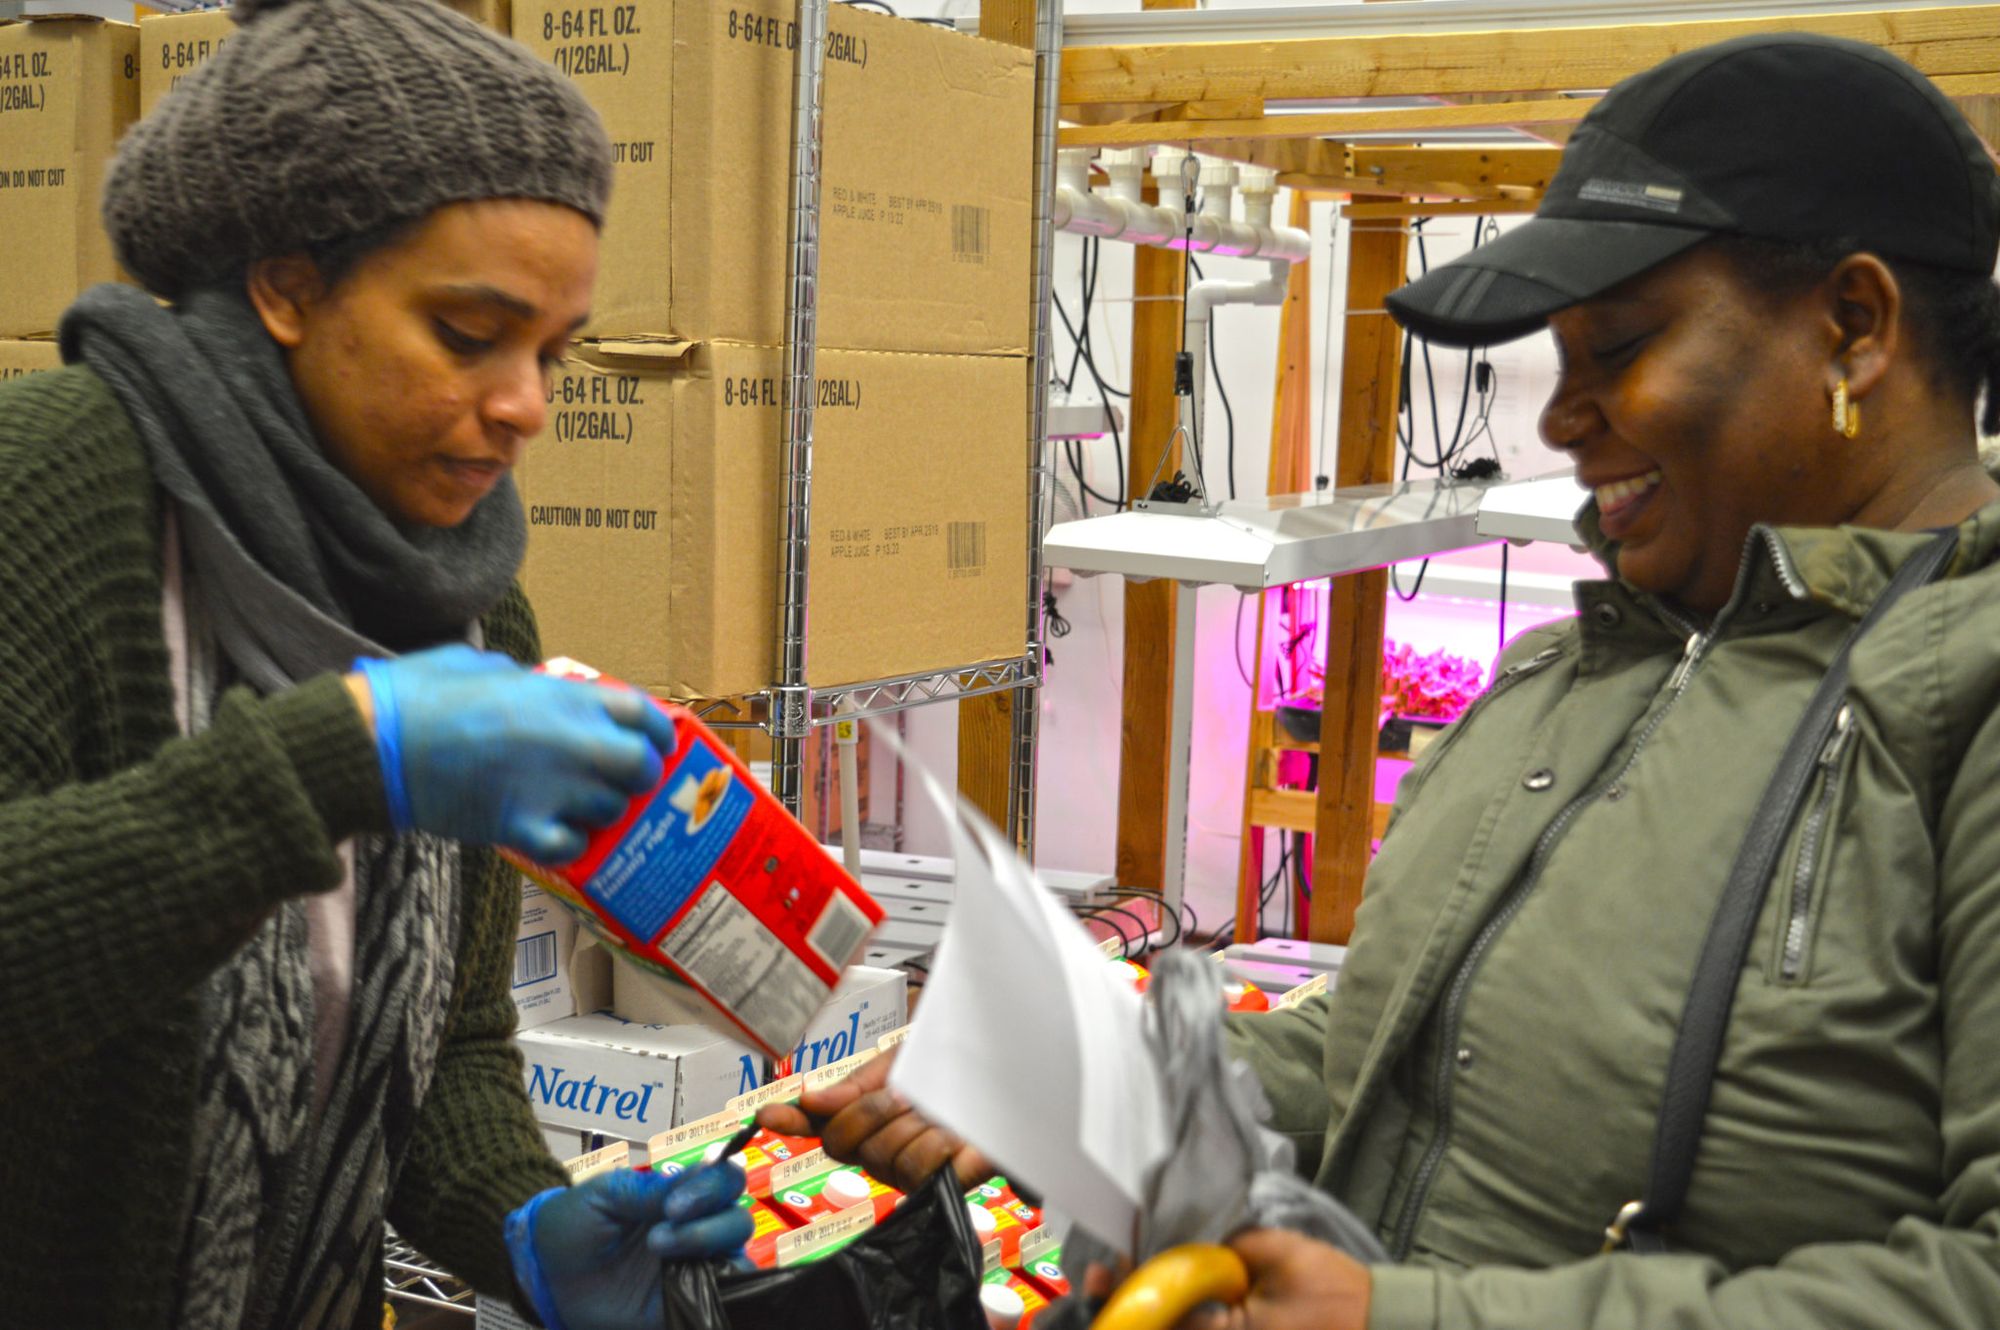 Please join CAMBA in bringing Thanksgiving meals to hungry families in Brooklyn